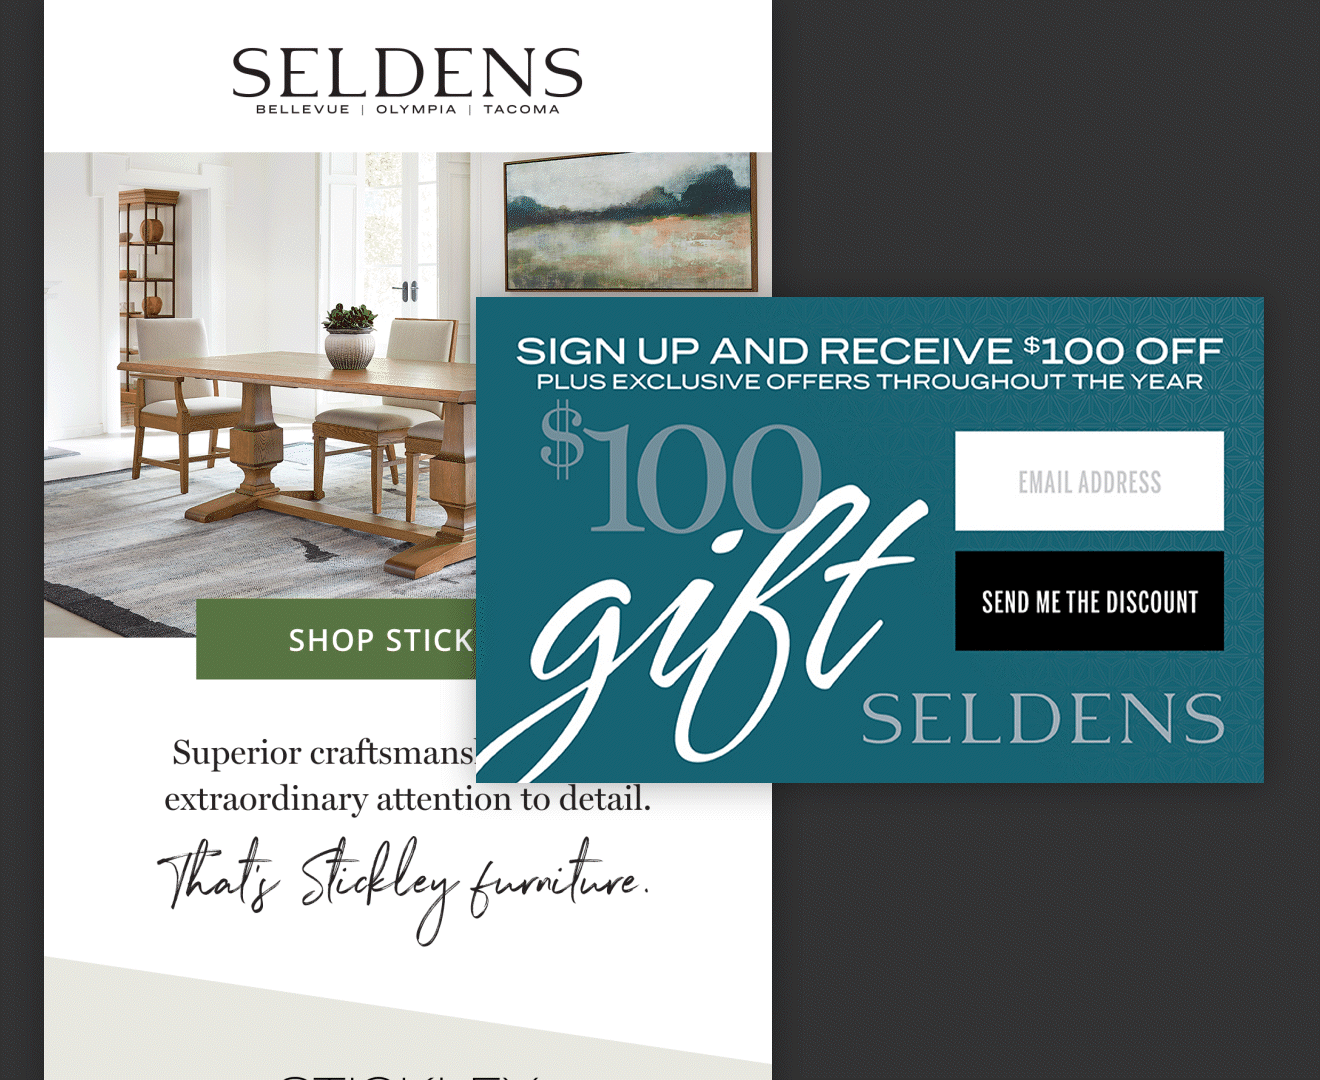 Seldens Black Friday campaign